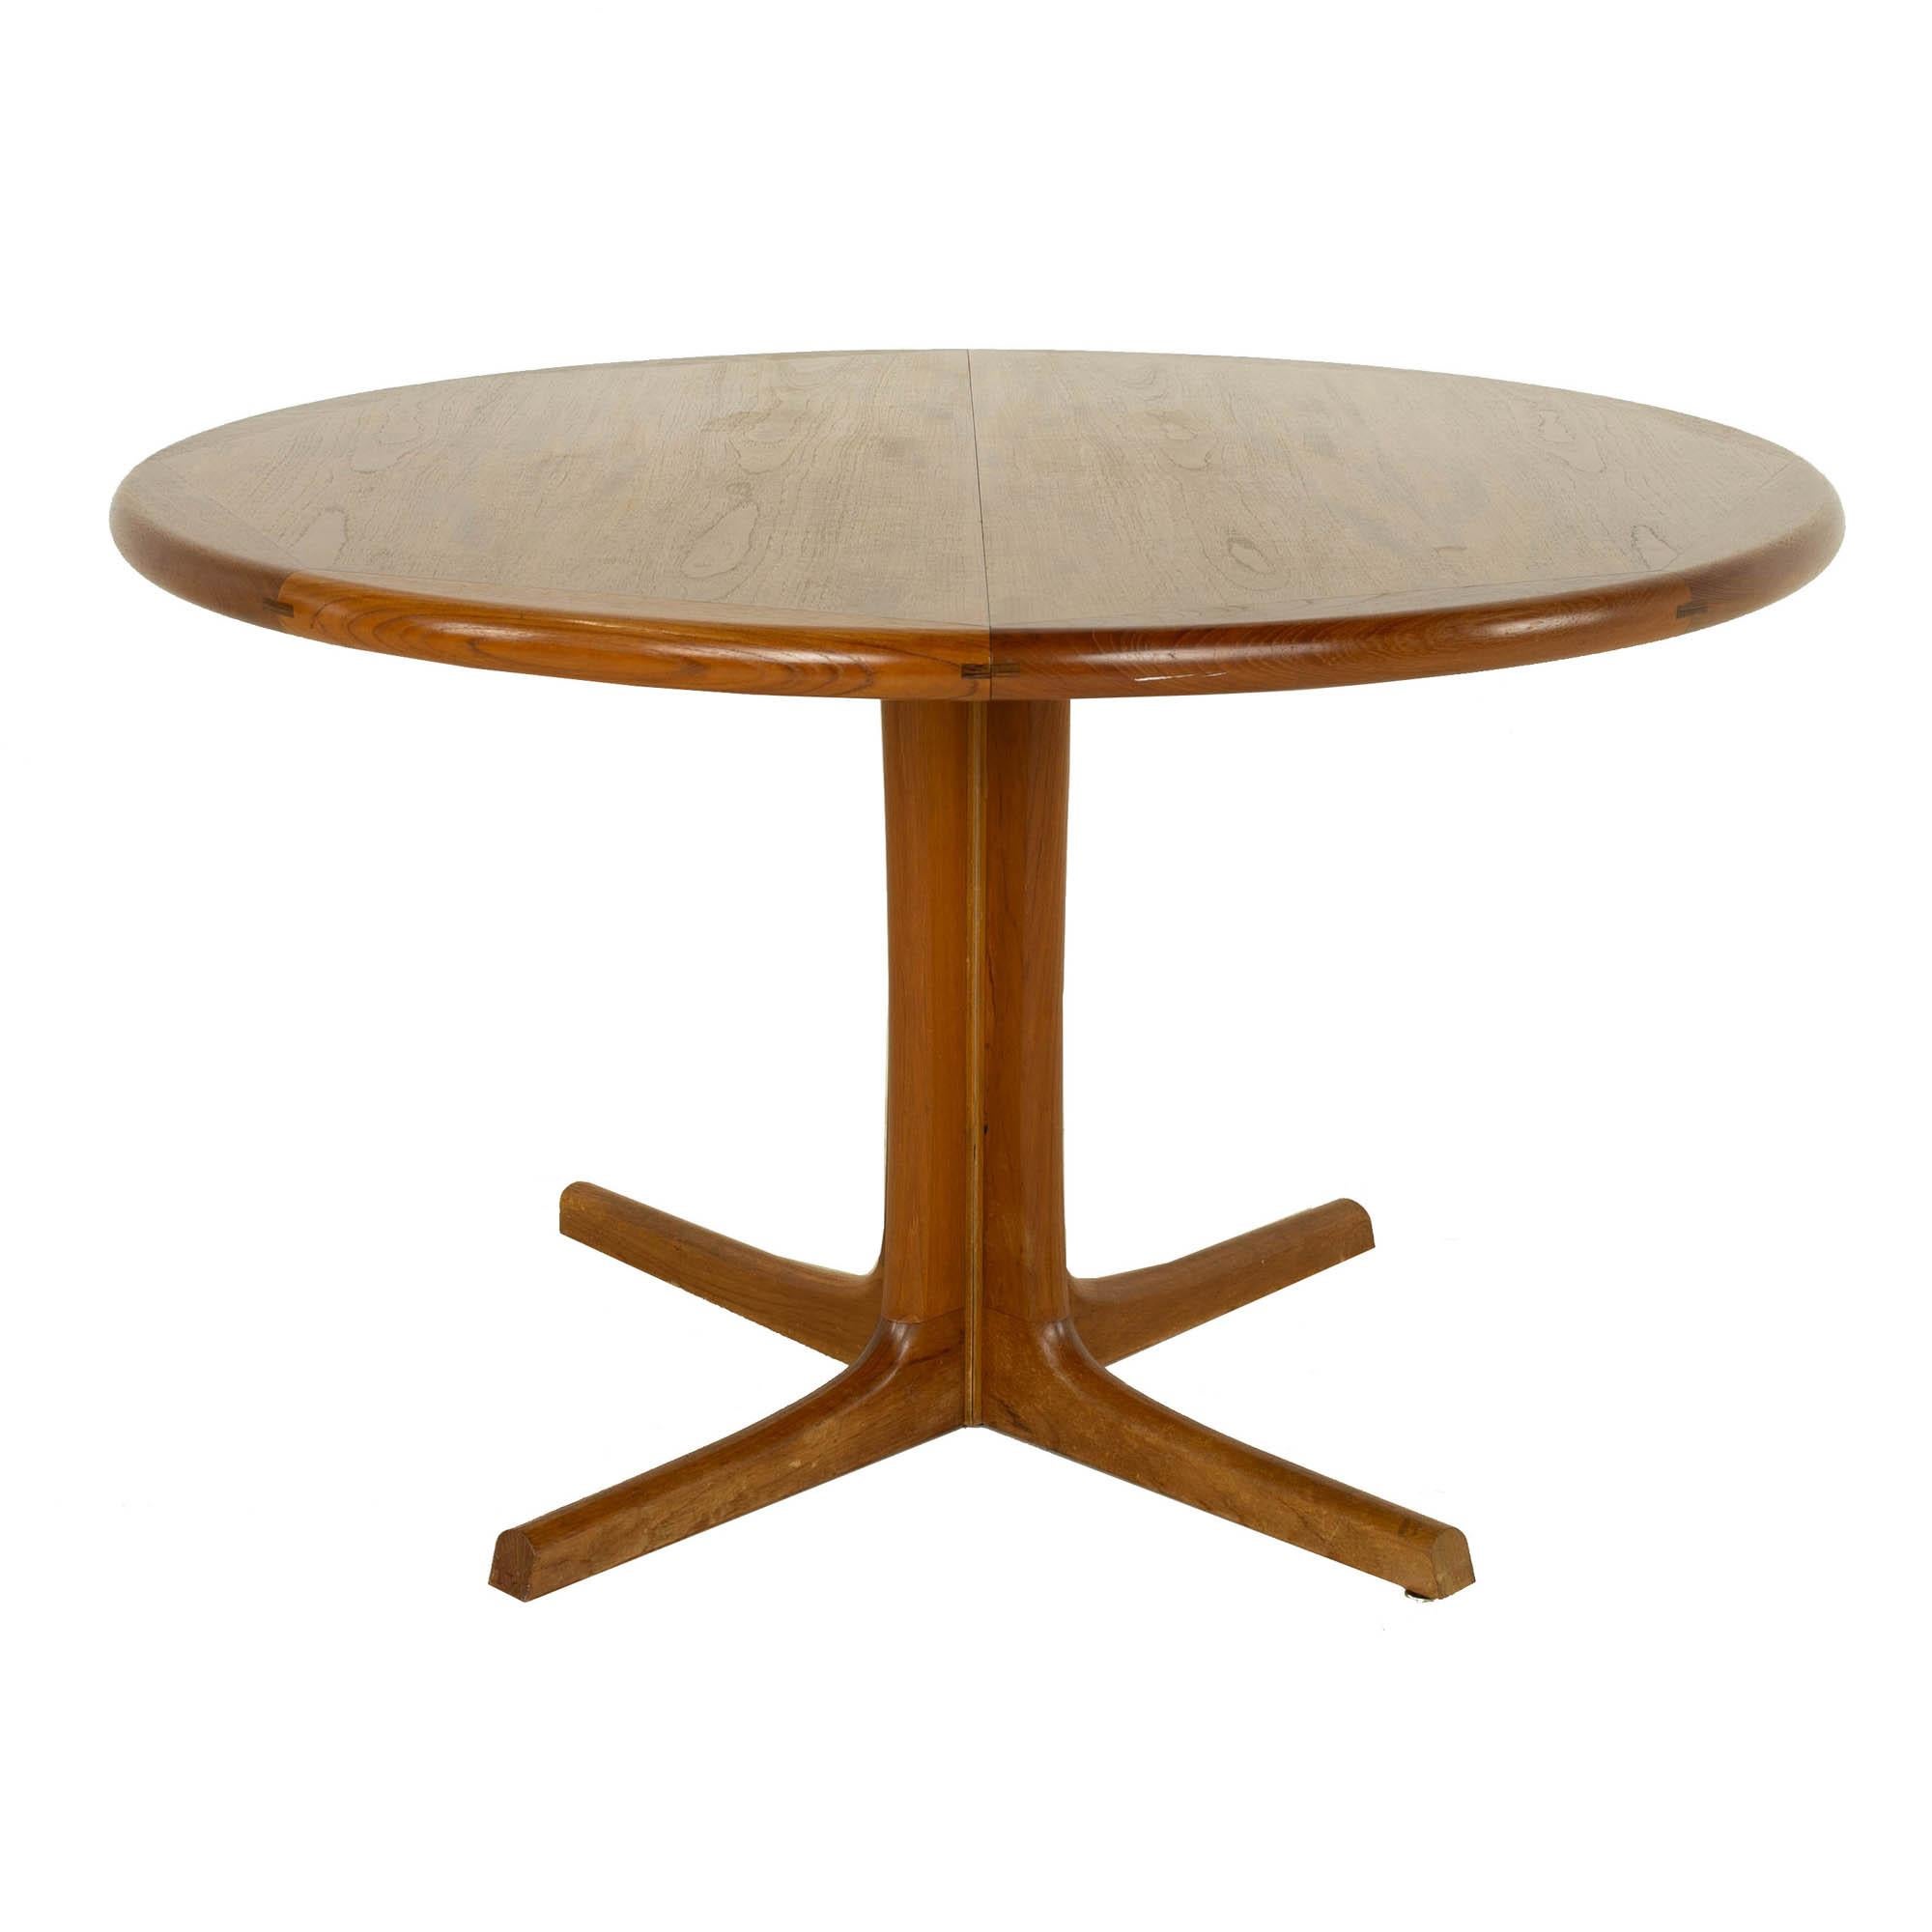 D-Scan mid century teak round dining table - 2 leaves

This table measures: 47.75 wide x 47.75 deep x 28.5 inches high, with a chair clearance of 26.75 inches, each leaf is 19.75 wide making the table 87.25 inches wide

?All pieces of furniture